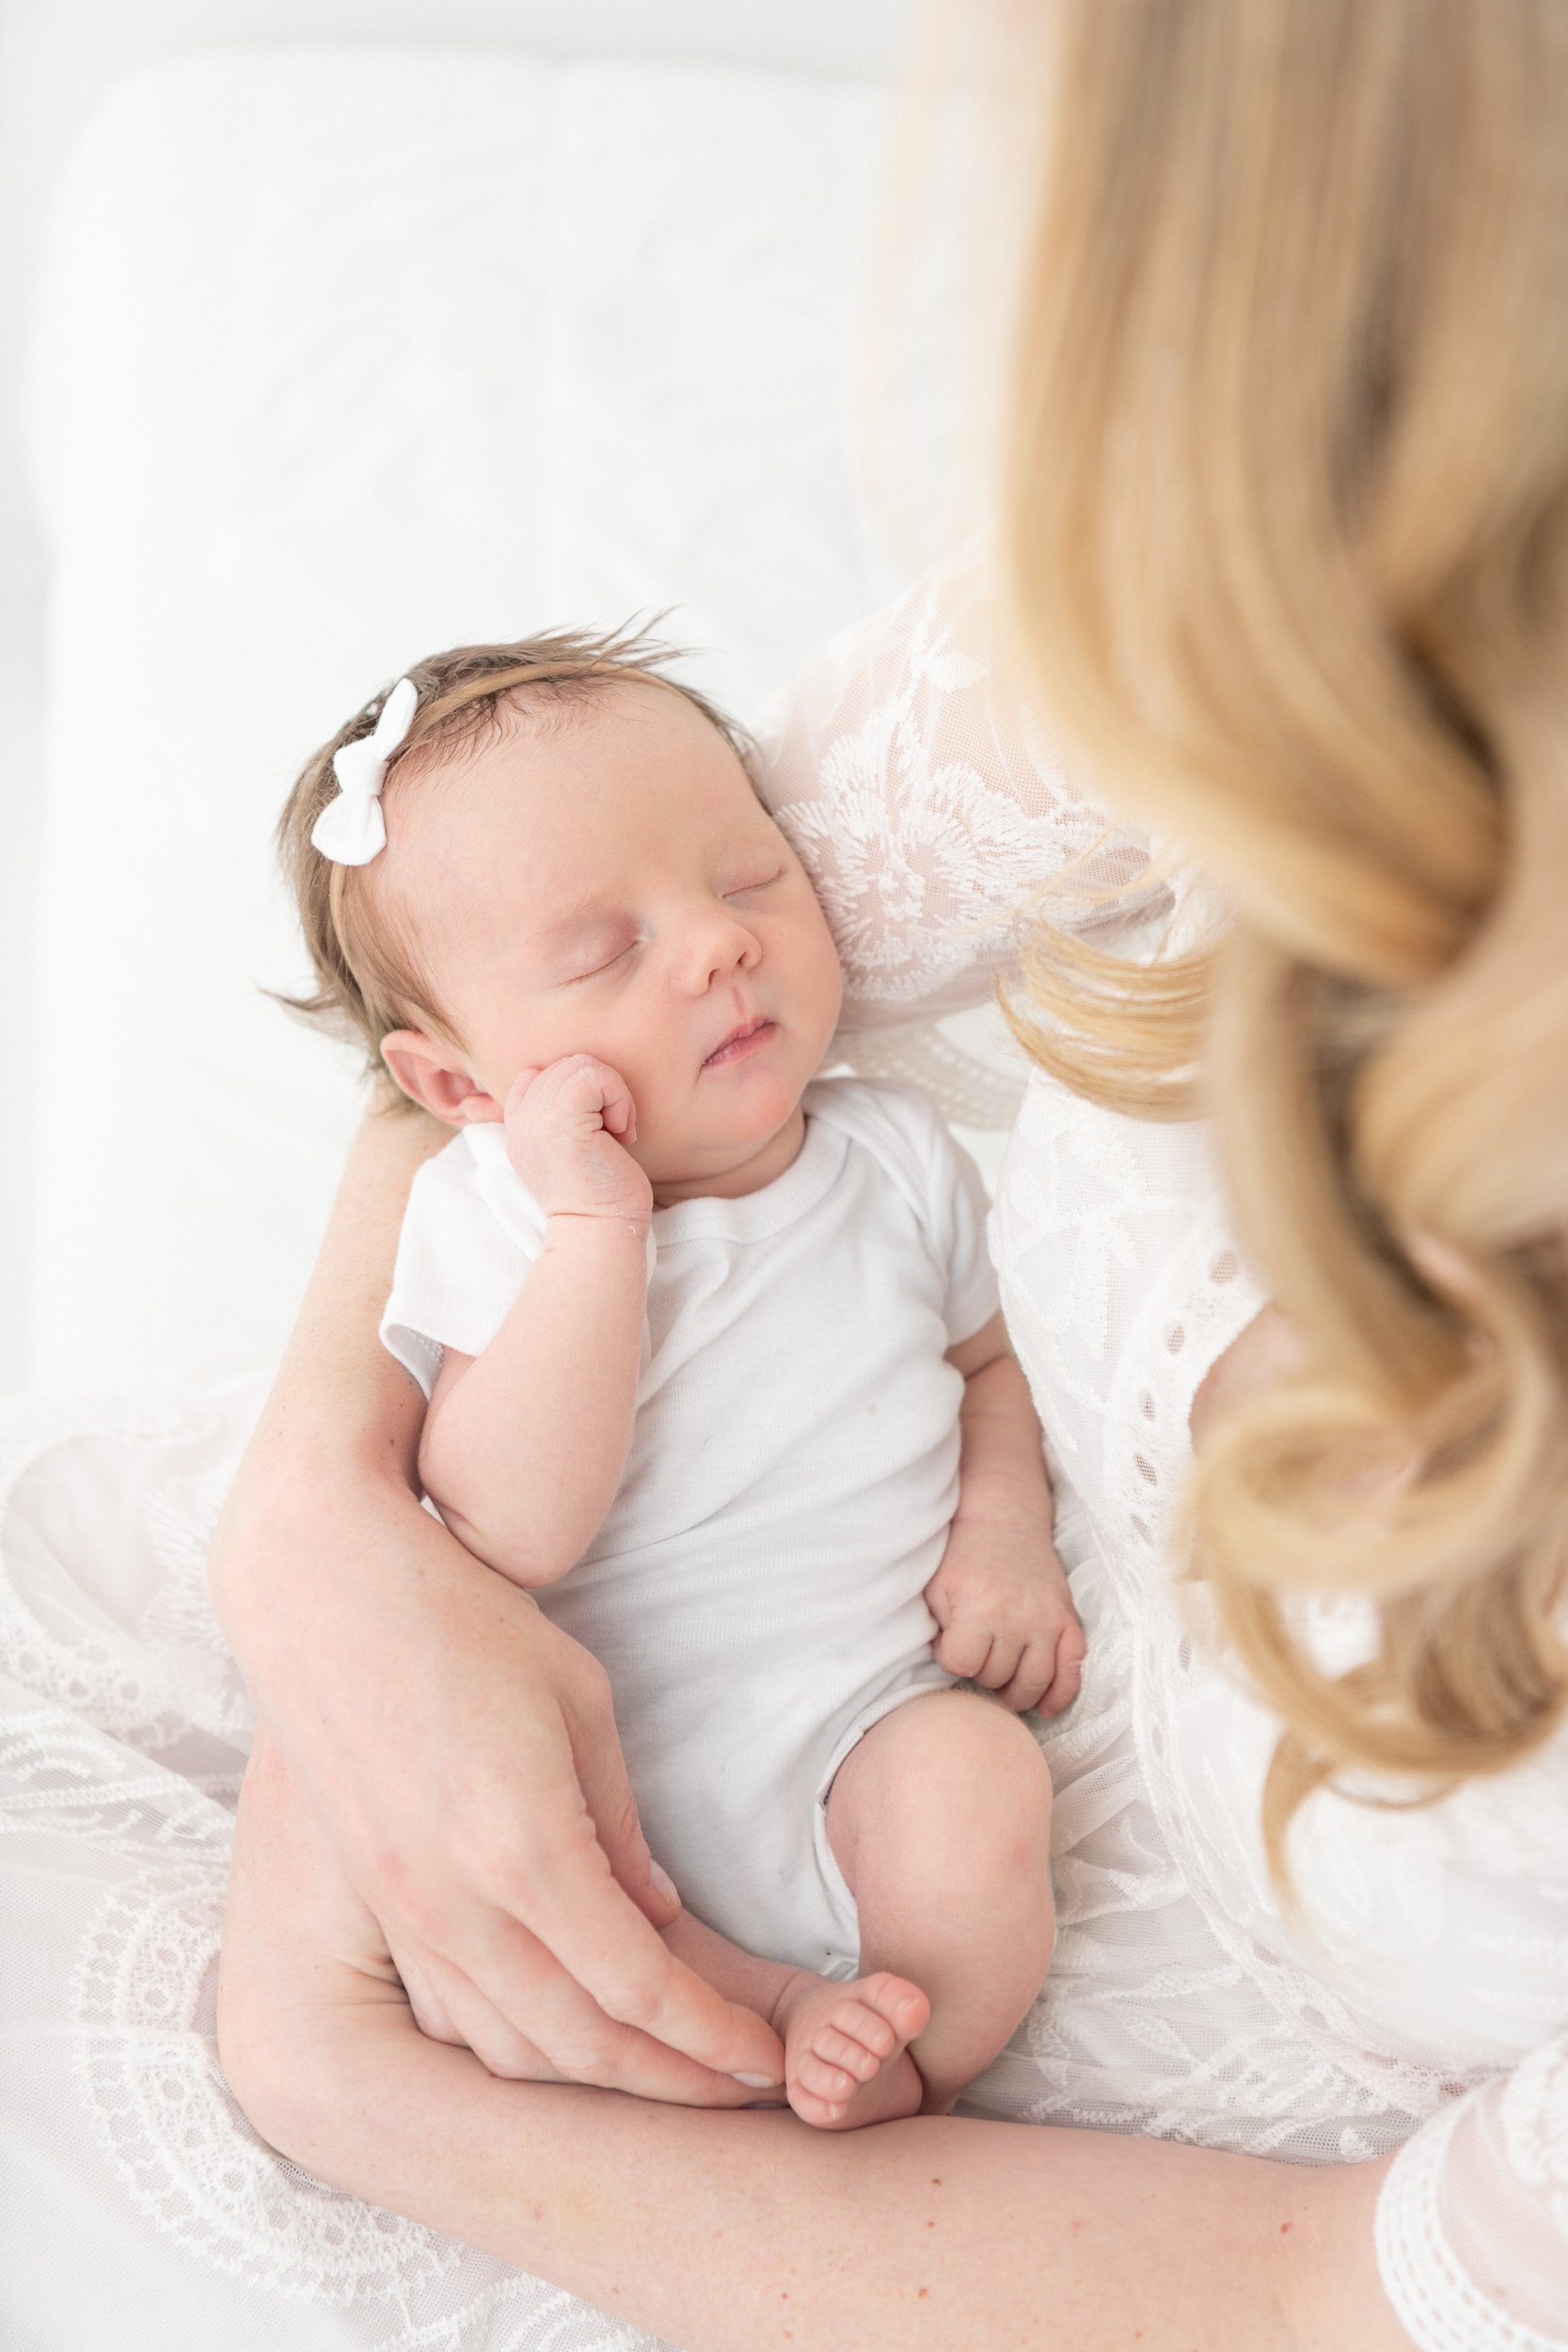  A newborn baby girl is held in her mother's arms in a white studio by Nicole Hawkins Photography. baby girl all in white #NicoleHawkinsPhotography #NicoleHawkinsNewborns #StudioPhotography #NewYorkPhotographer #NJphotographers #newborn 